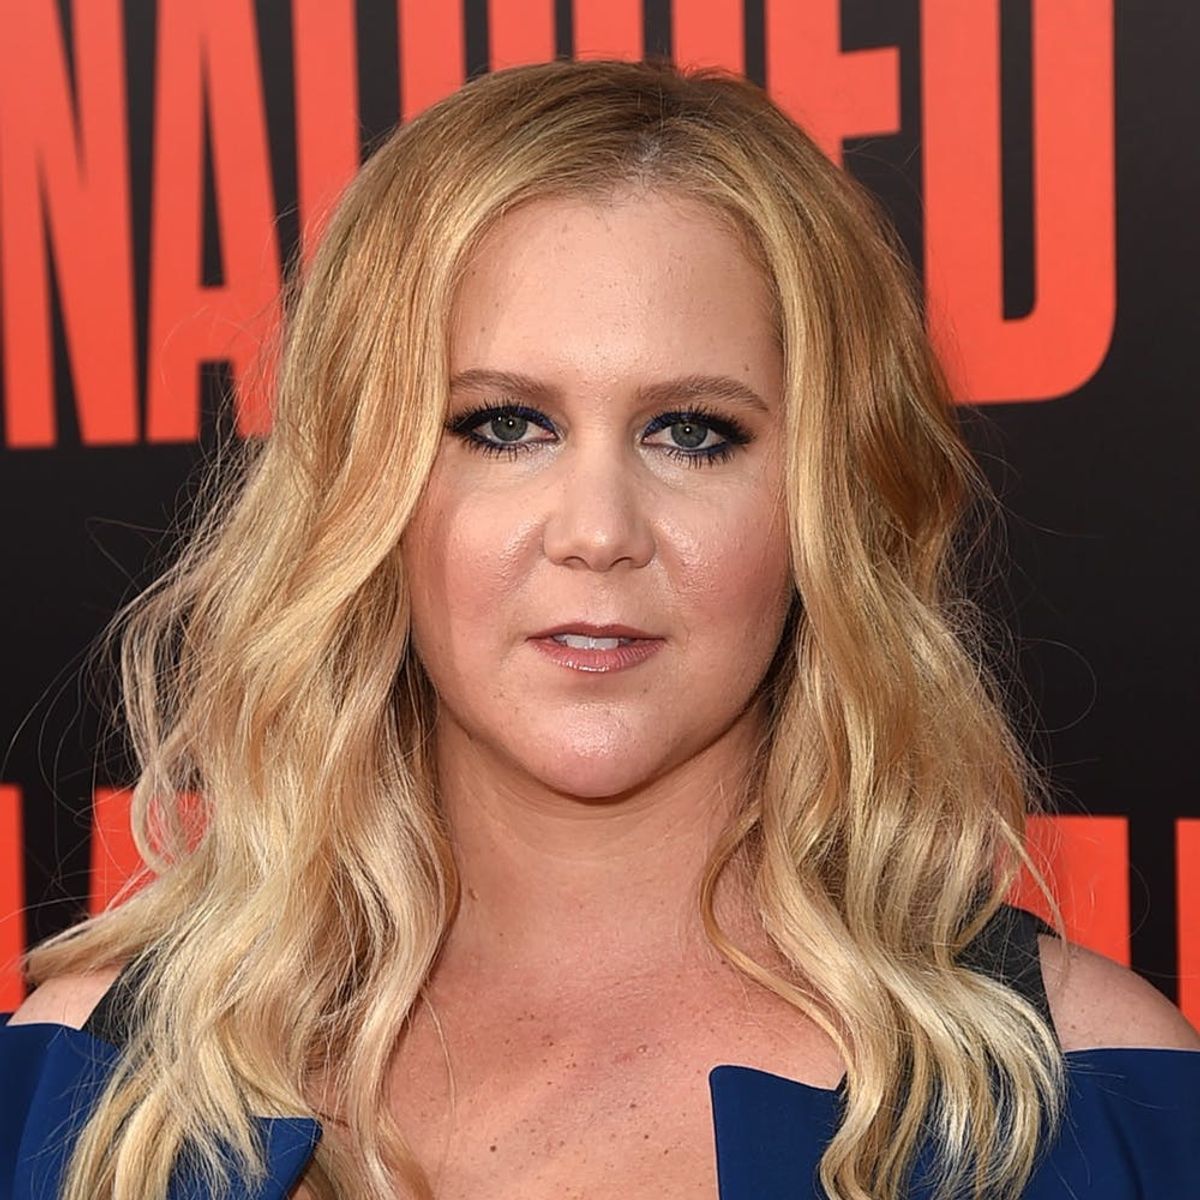 Amy Schumer Shares Some of the ‘Bummer’ Details of Her Difficult Pregnancy